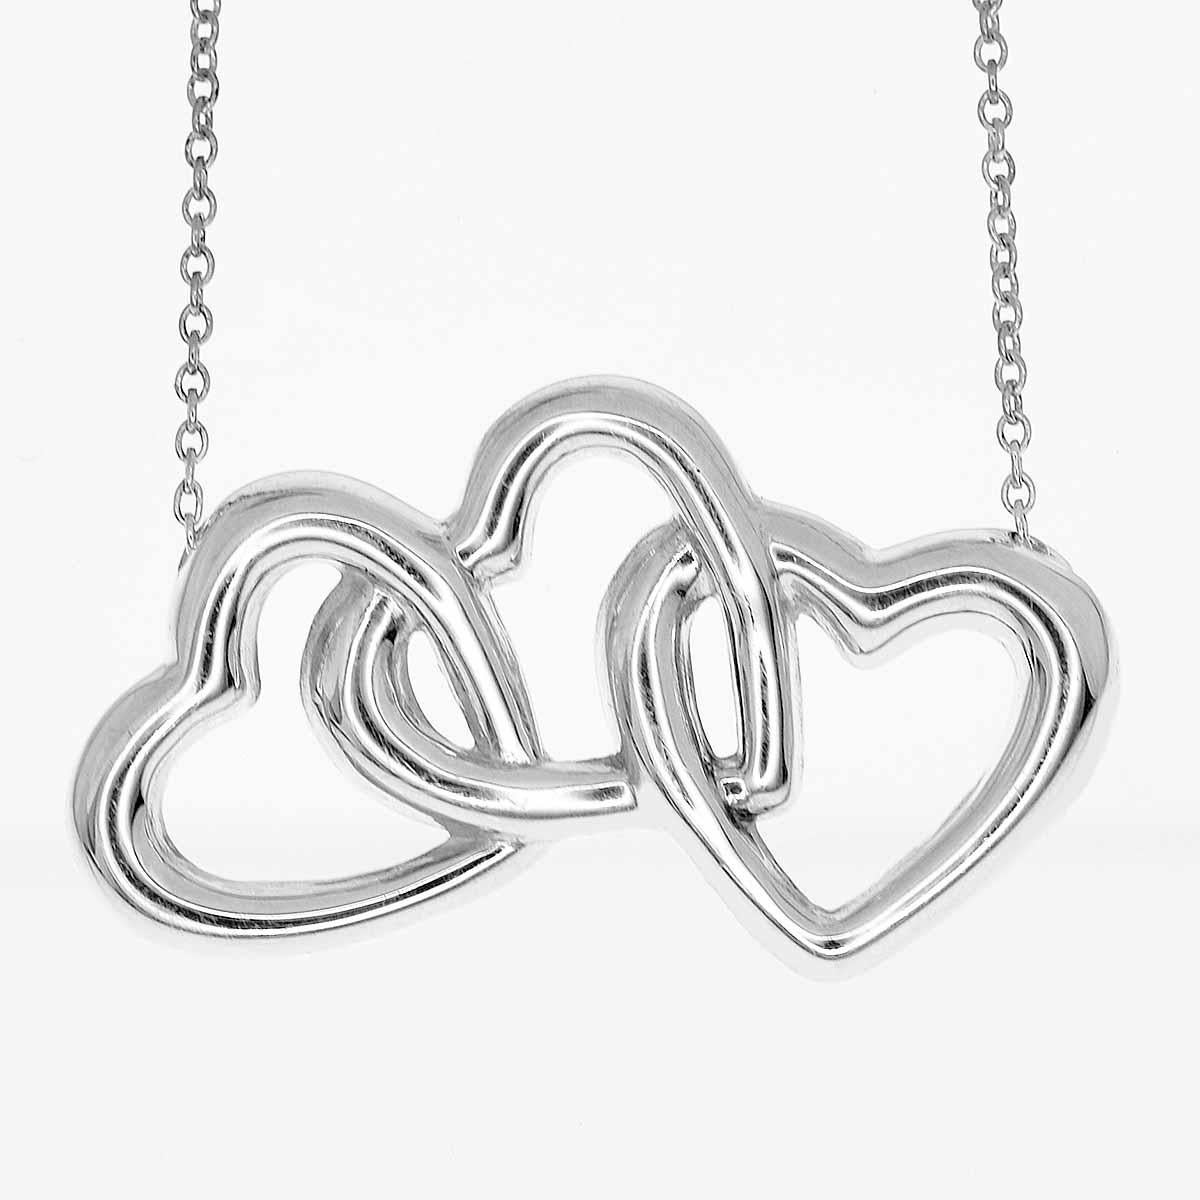 Brand:TIFFANY&Co.
Name:Triple open heart necklace
Material:Sterling Silver
Weight:3.0g（Approx)
neck around:43cm / 16.92in（Approx)
Top size:W30mm×H14mm / W1.18in×H0.55in（Approx)
Comes with:Tiffany box
Comment:Box is dirty